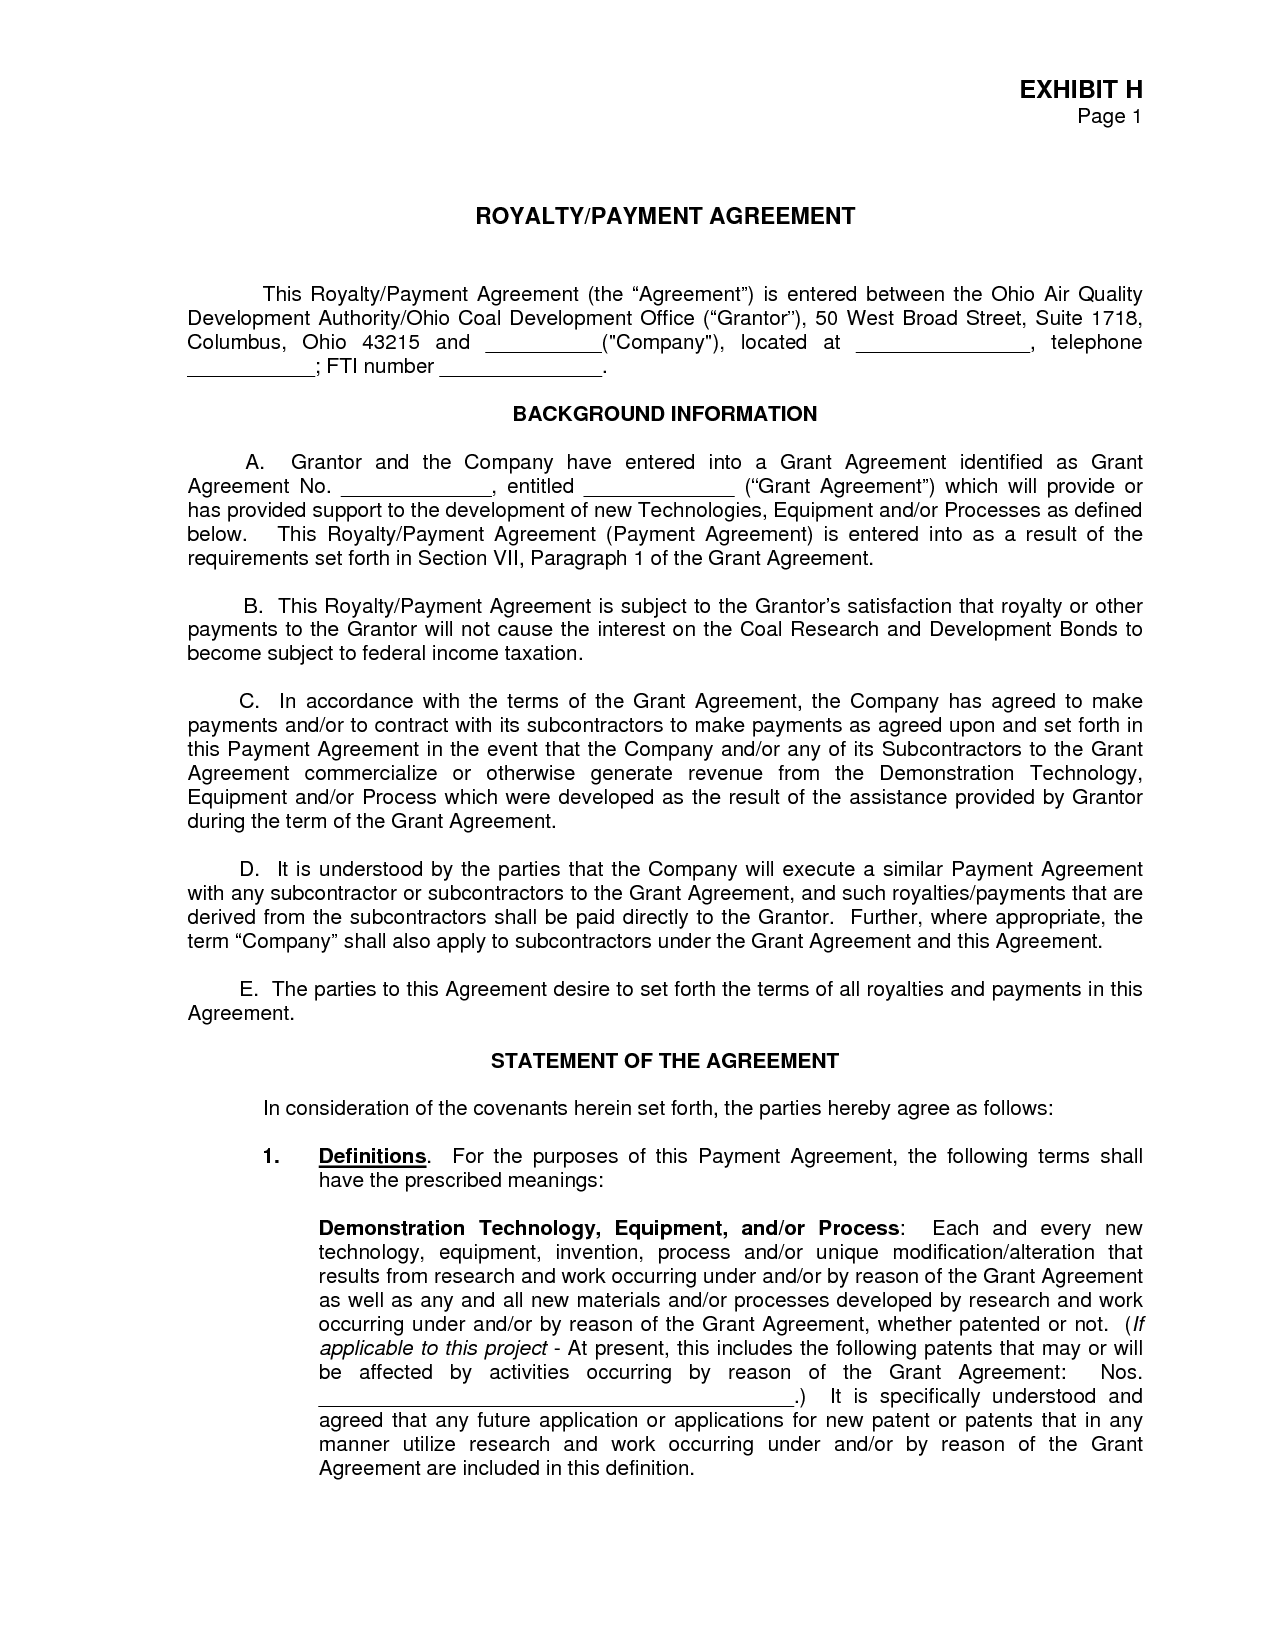 Royalty Agreement Contract Free Printable Documents